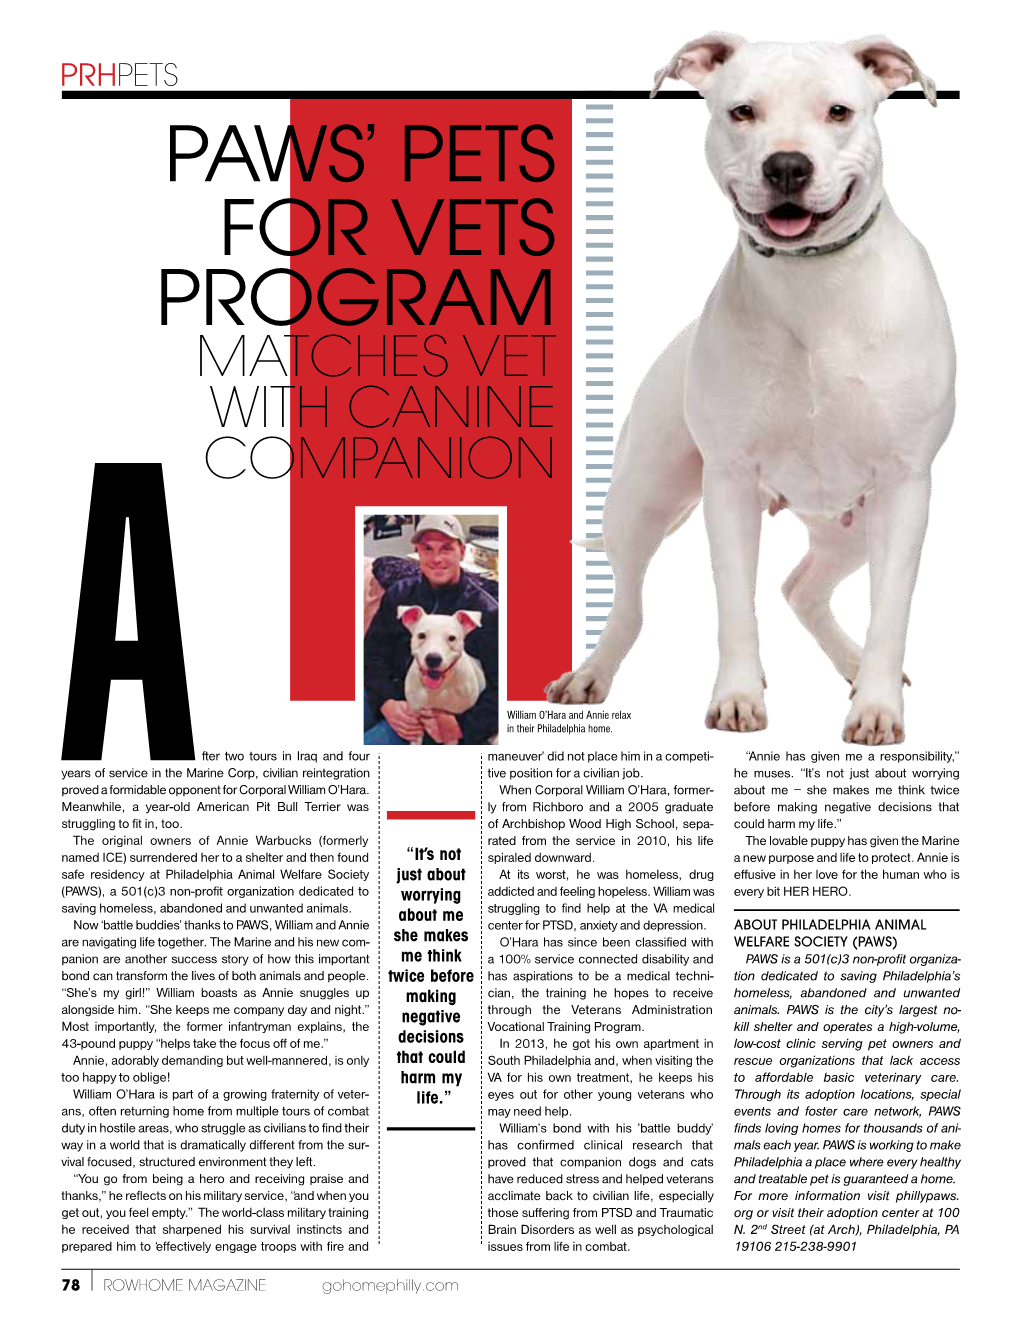 PAWS' Pets for Vets Program